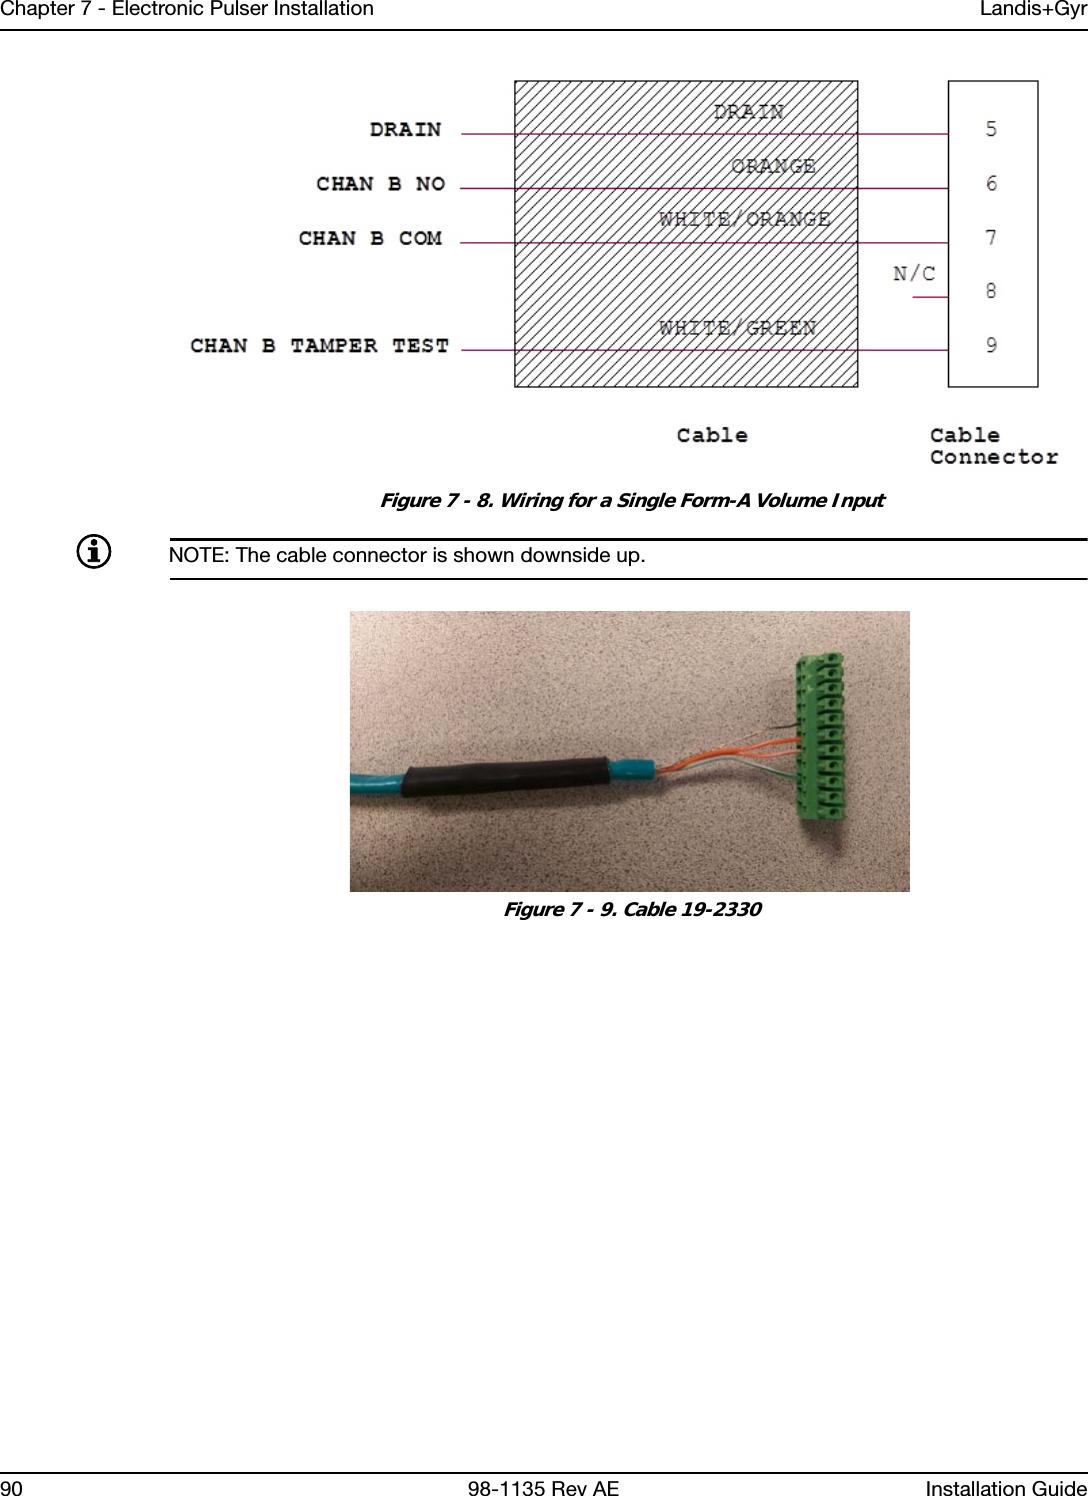 Chapter 7 - Electronic Pulser Installation Landis+Gyr90 98-1135 Rev AE Installation Guide Figure 7 - 8. Wiring for a Single Form-A Volume InputNOTE: The cable connector is shown downside up. Figure 7 - 9. Cable 19-2330